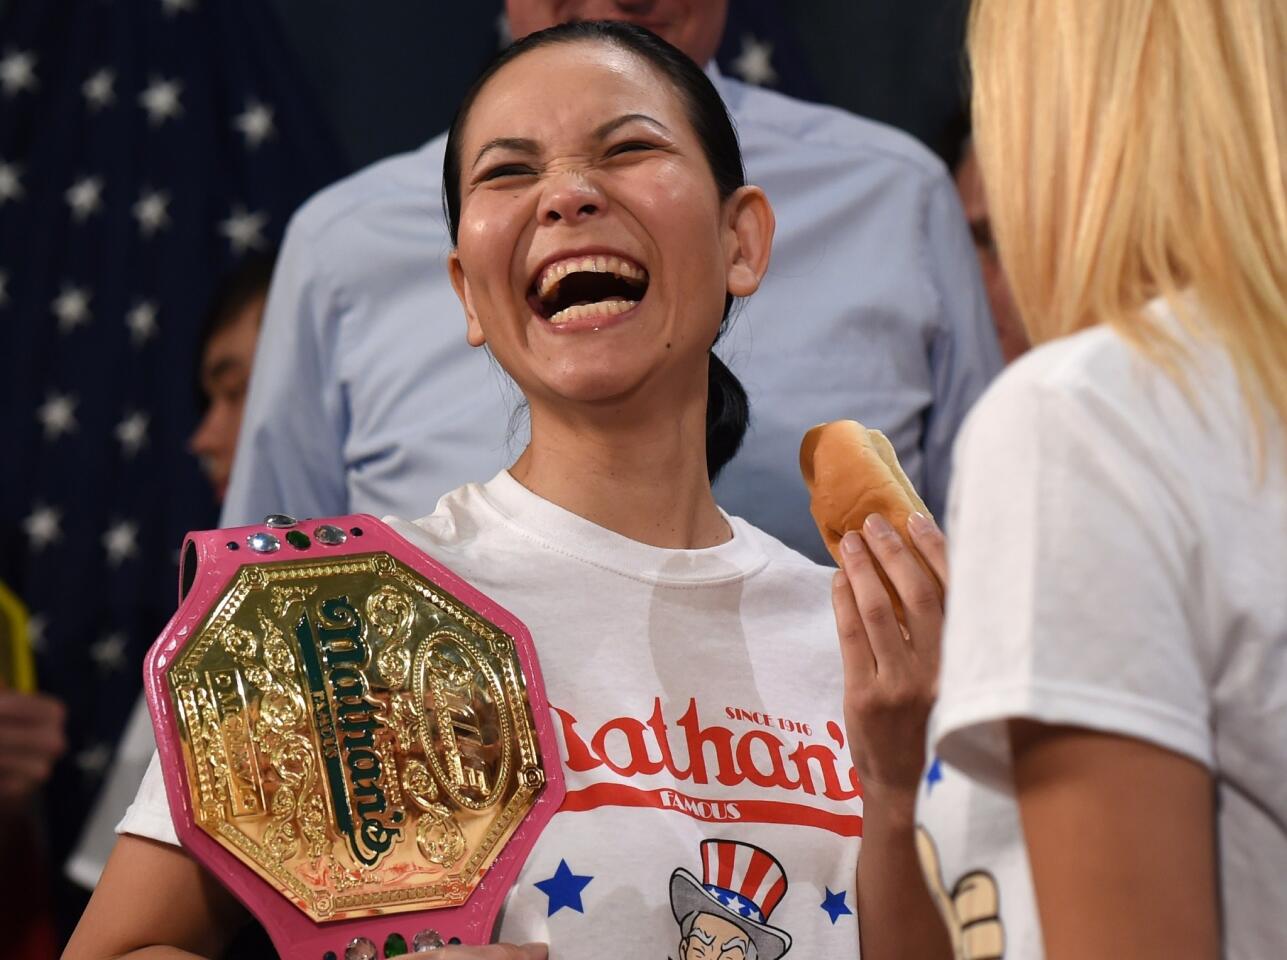 Hot dog-eating contest weigh-in